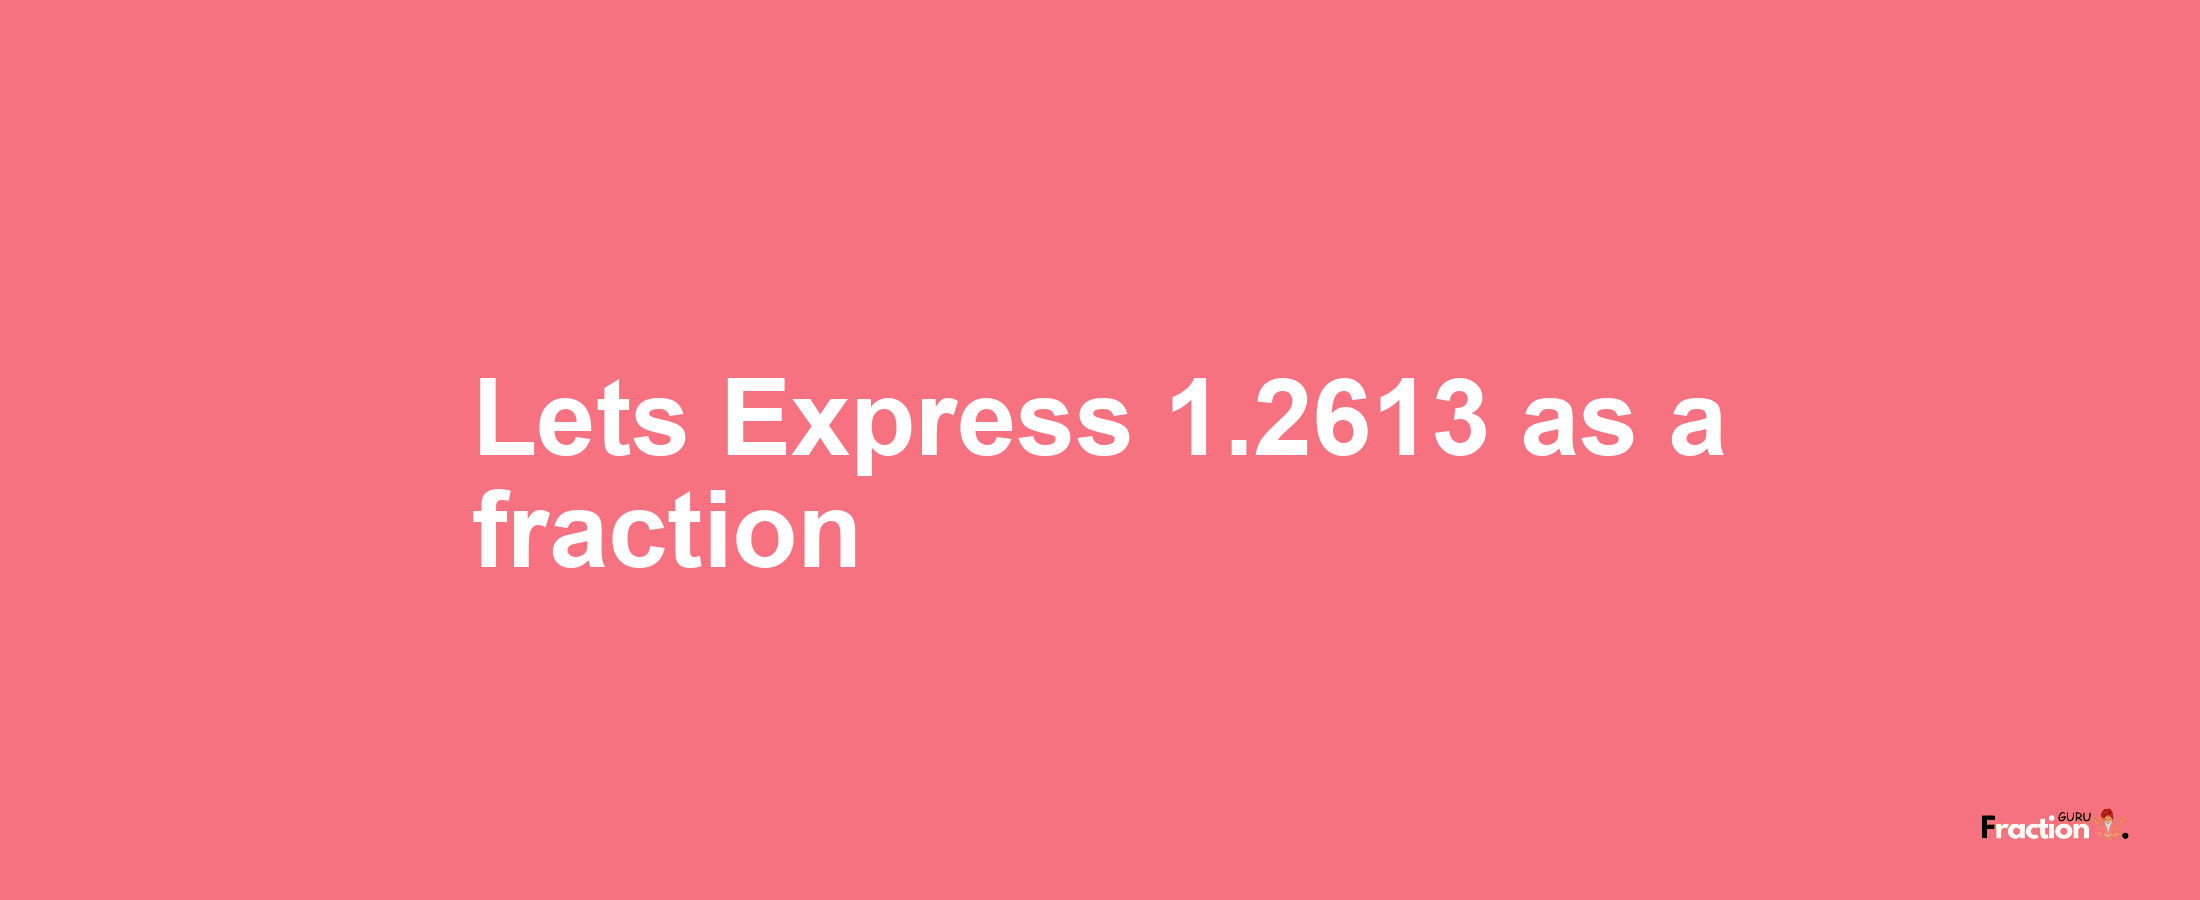 Lets Express 1.2613 as afraction